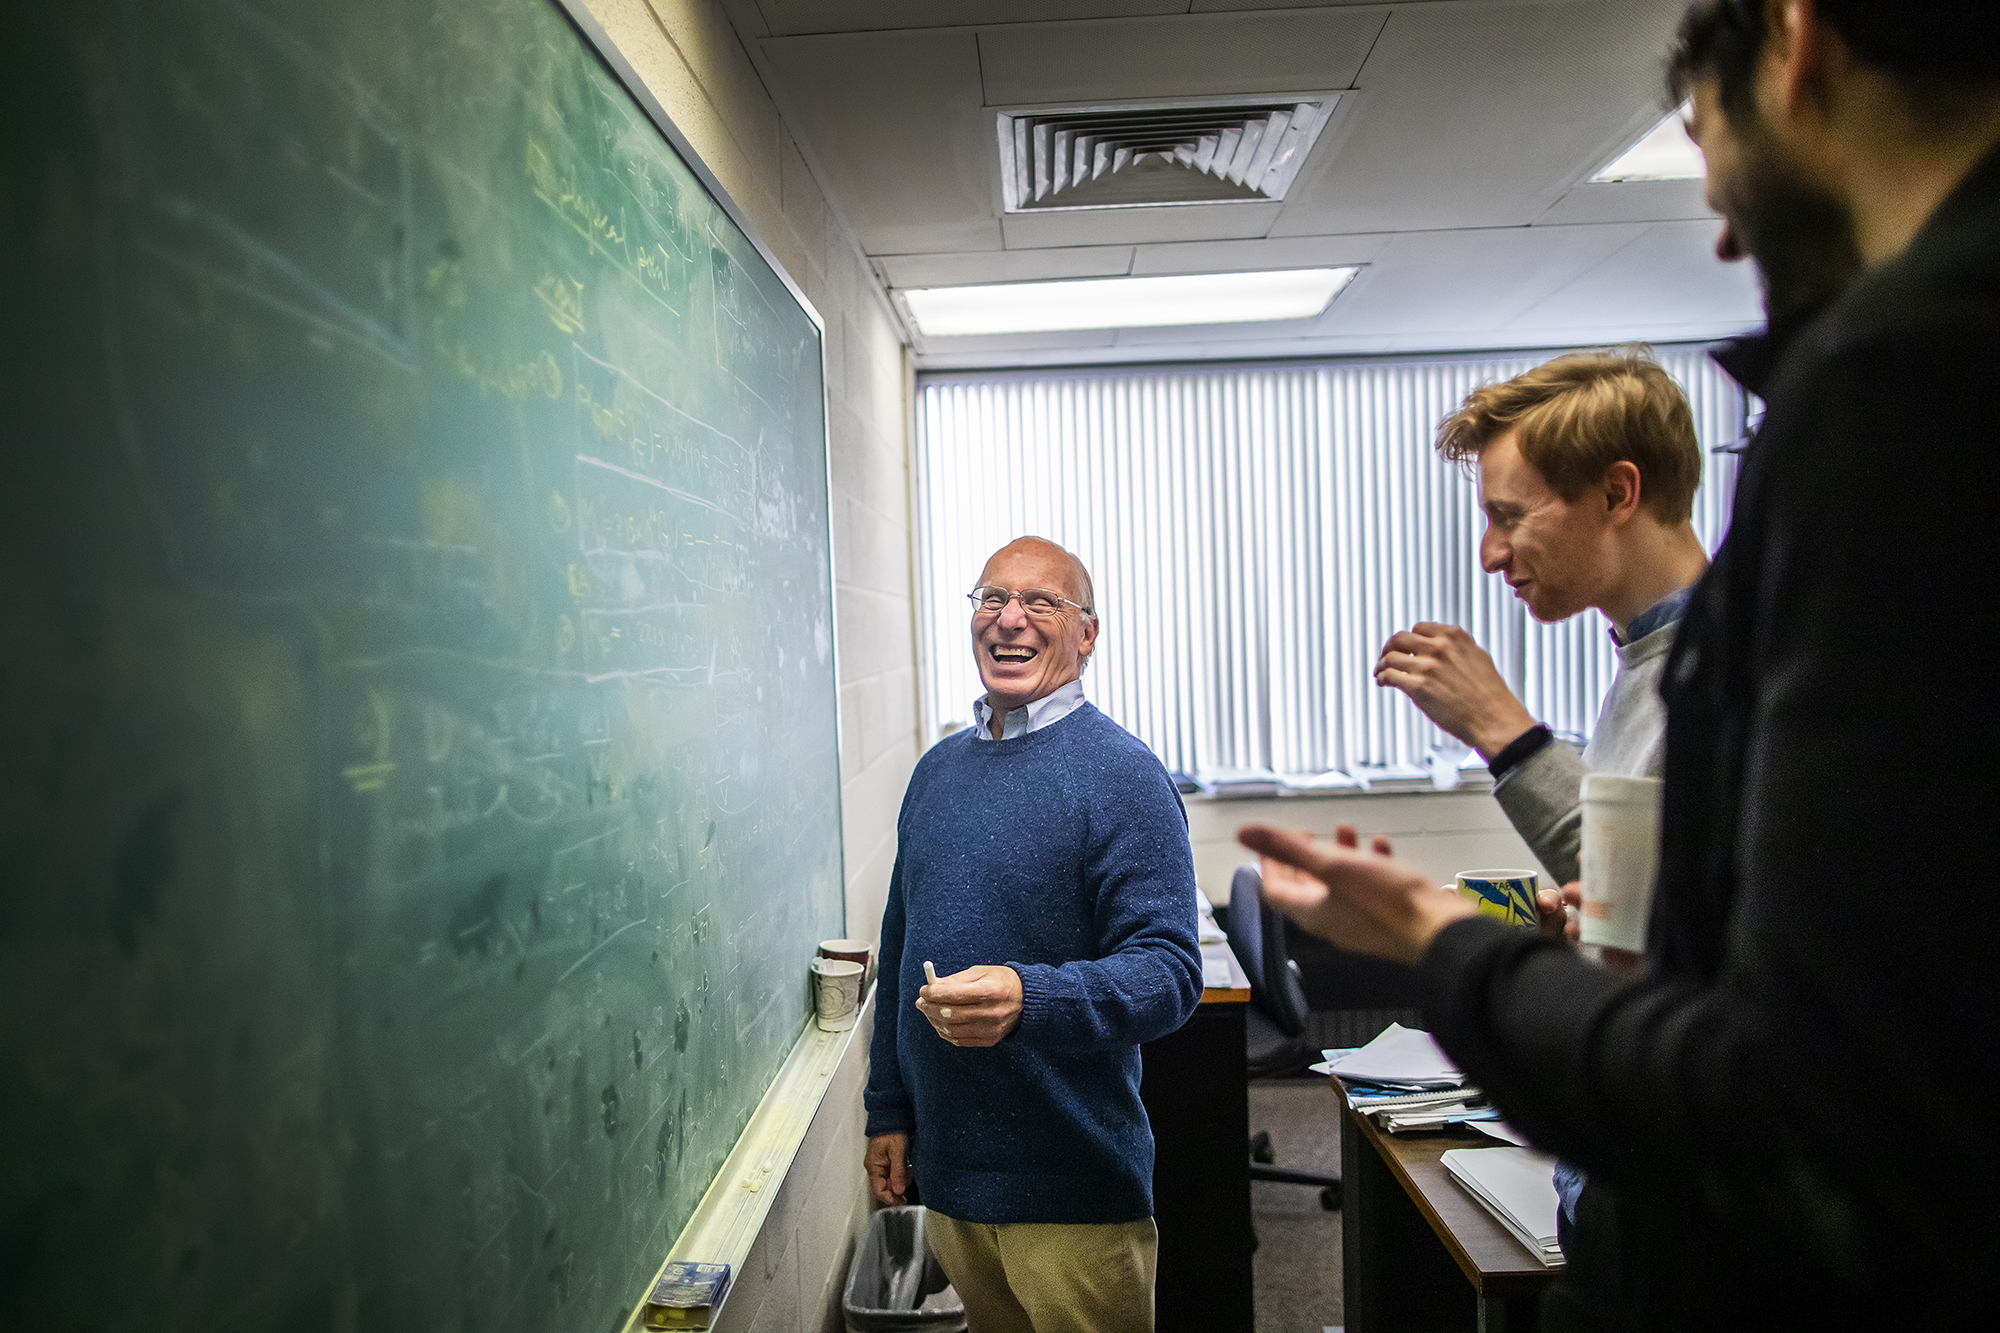 three people in front of a chalk board, the person closest to the board is laughing